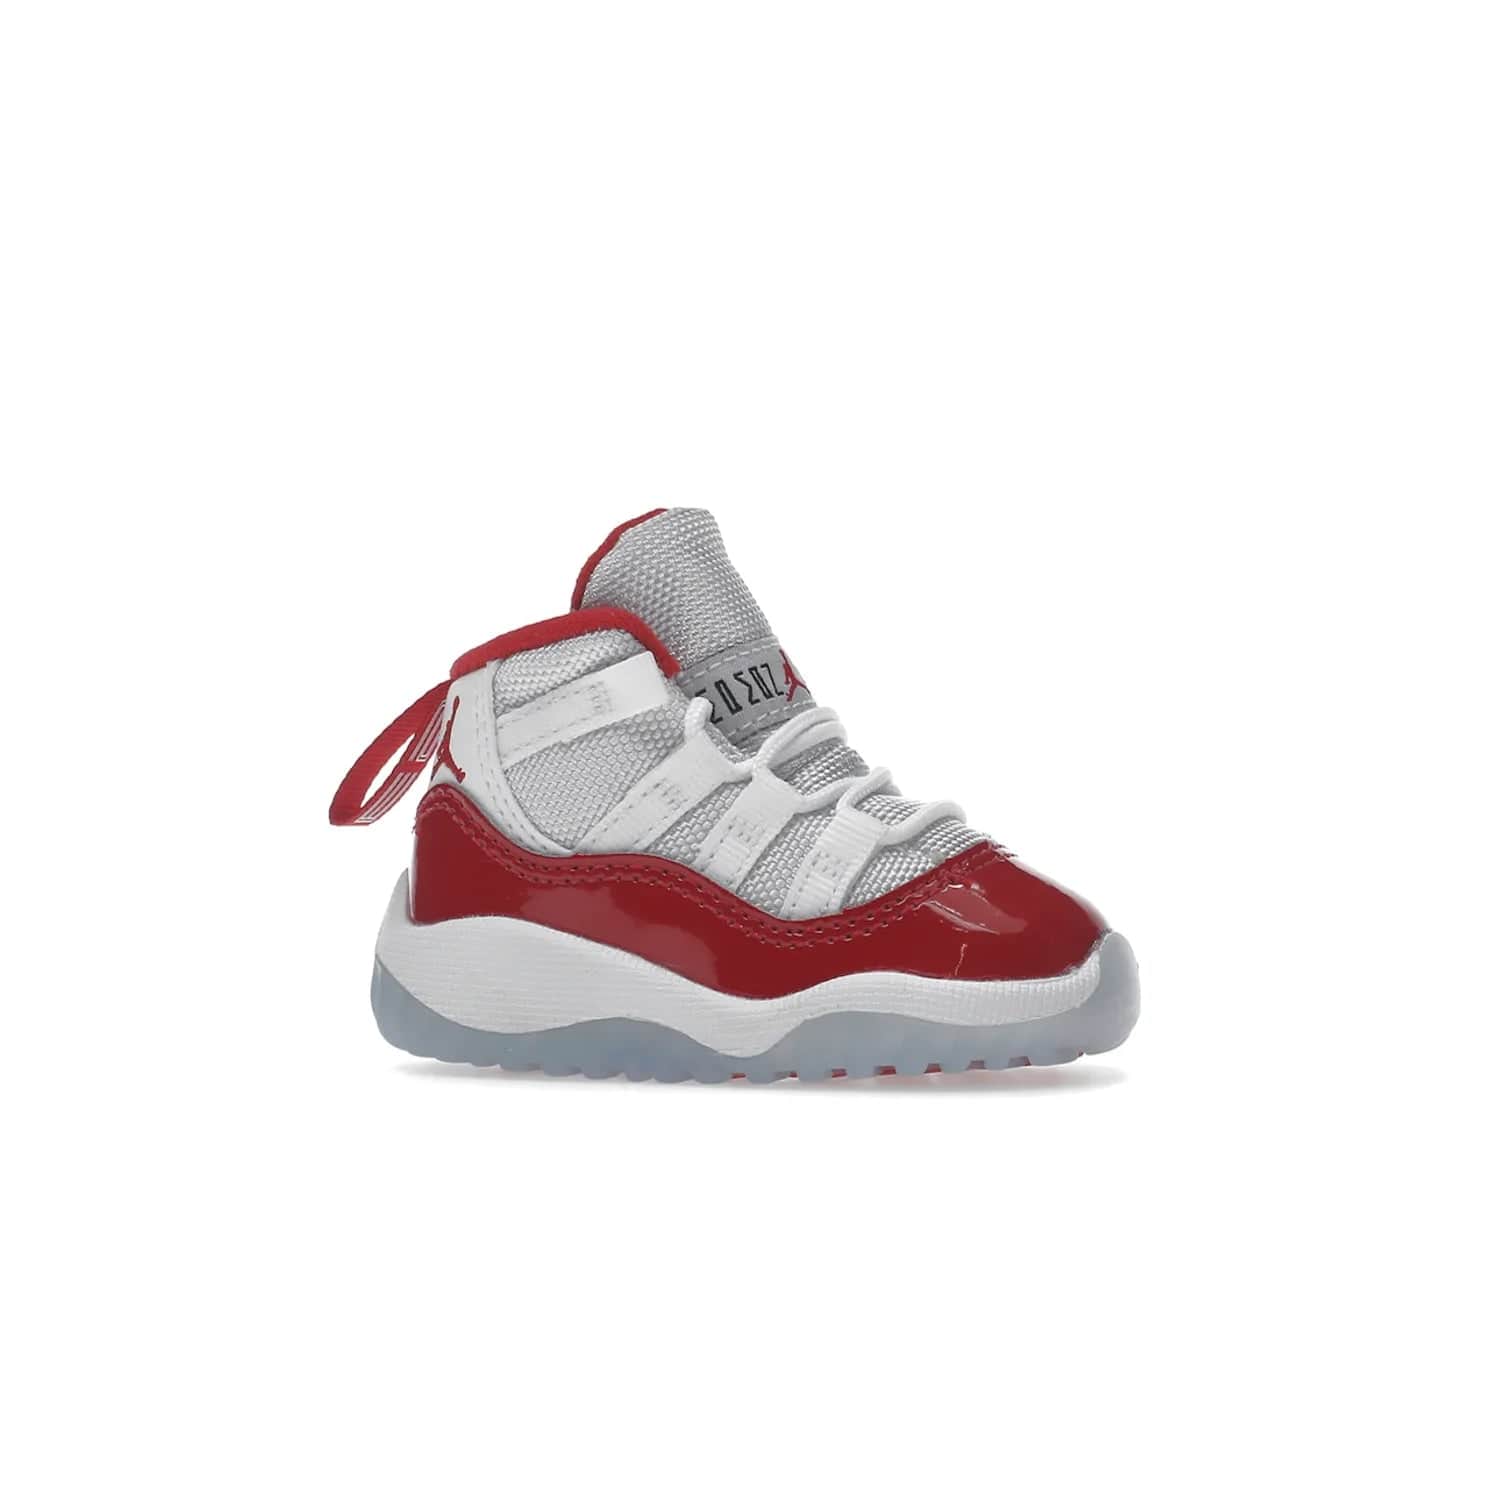 Jordan 11 Retro Cherry (2022) (TD) - Image 3 - Only at www.BallersClubKickz.com - Timeless classic. Air Jordan 11 Retro Cherry 2022 TD combines mesh, leather & suede for a unique look. White upper with varsity red suede. Jumpman logo on collar & tongue. Available Dec 10th, priced at $80.